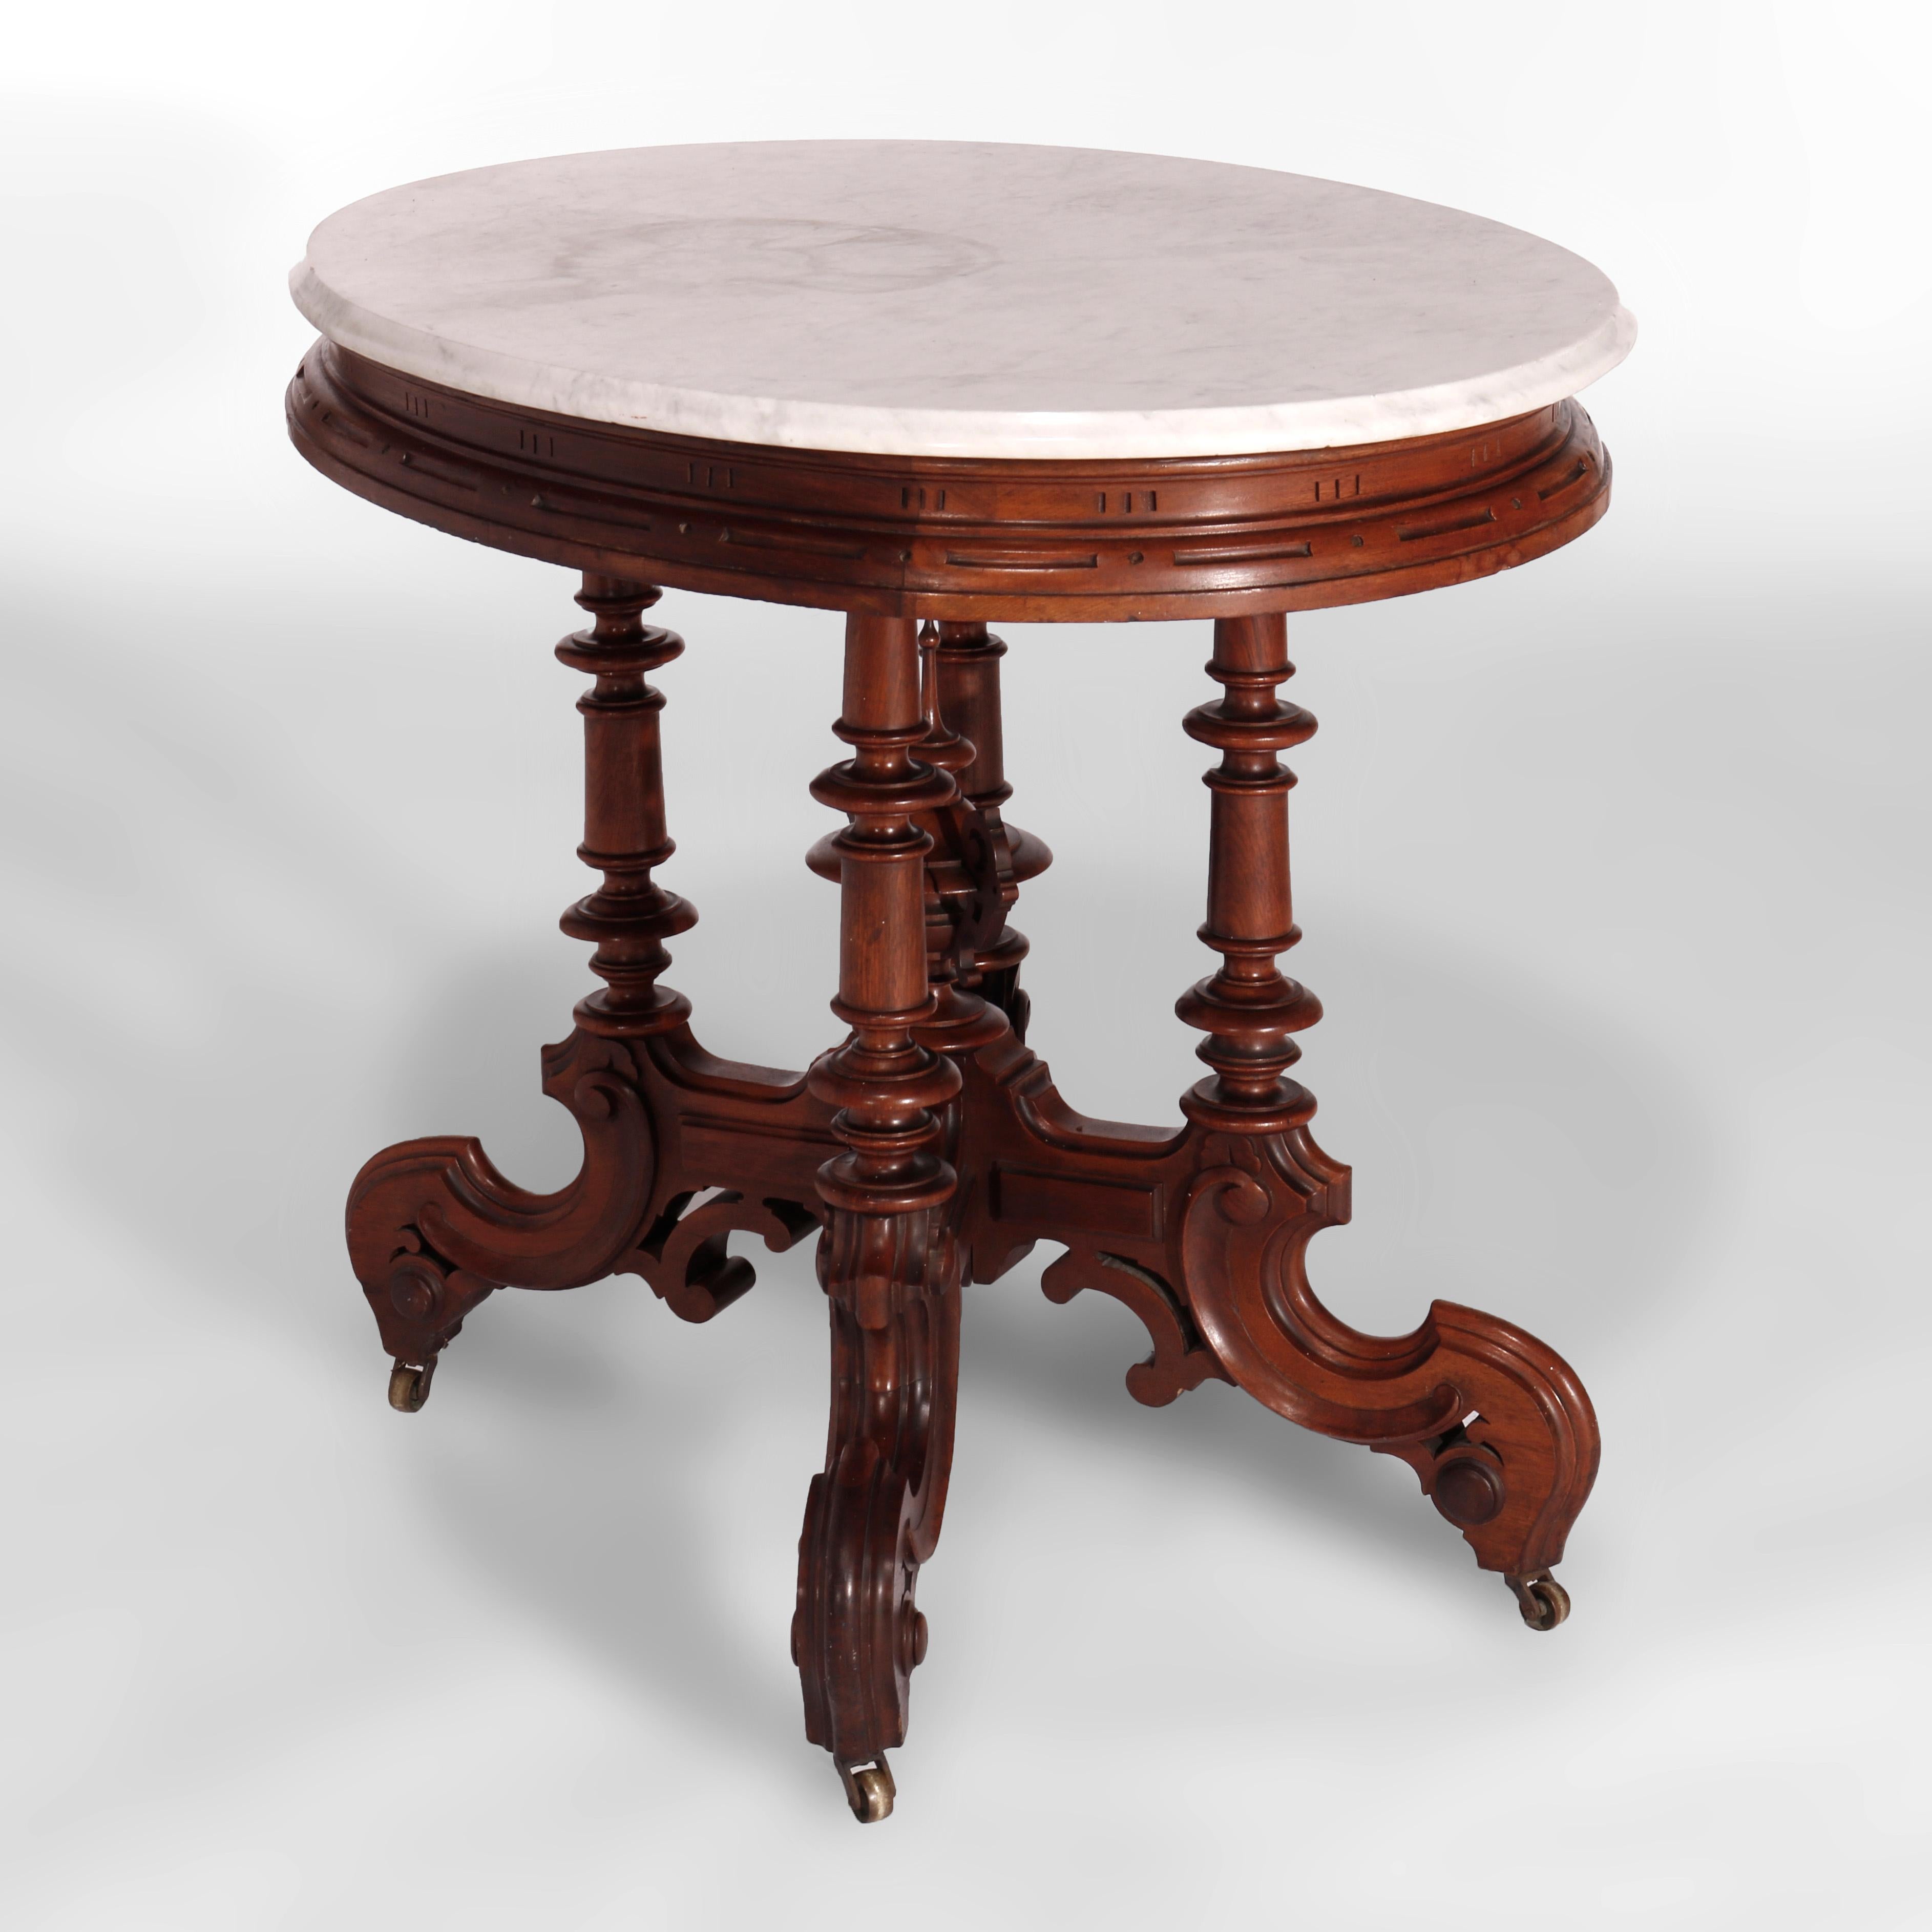 Antique Victorian Brooks Brothers Walnut & Marble Parlor Table, circa 1890 For Sale 1